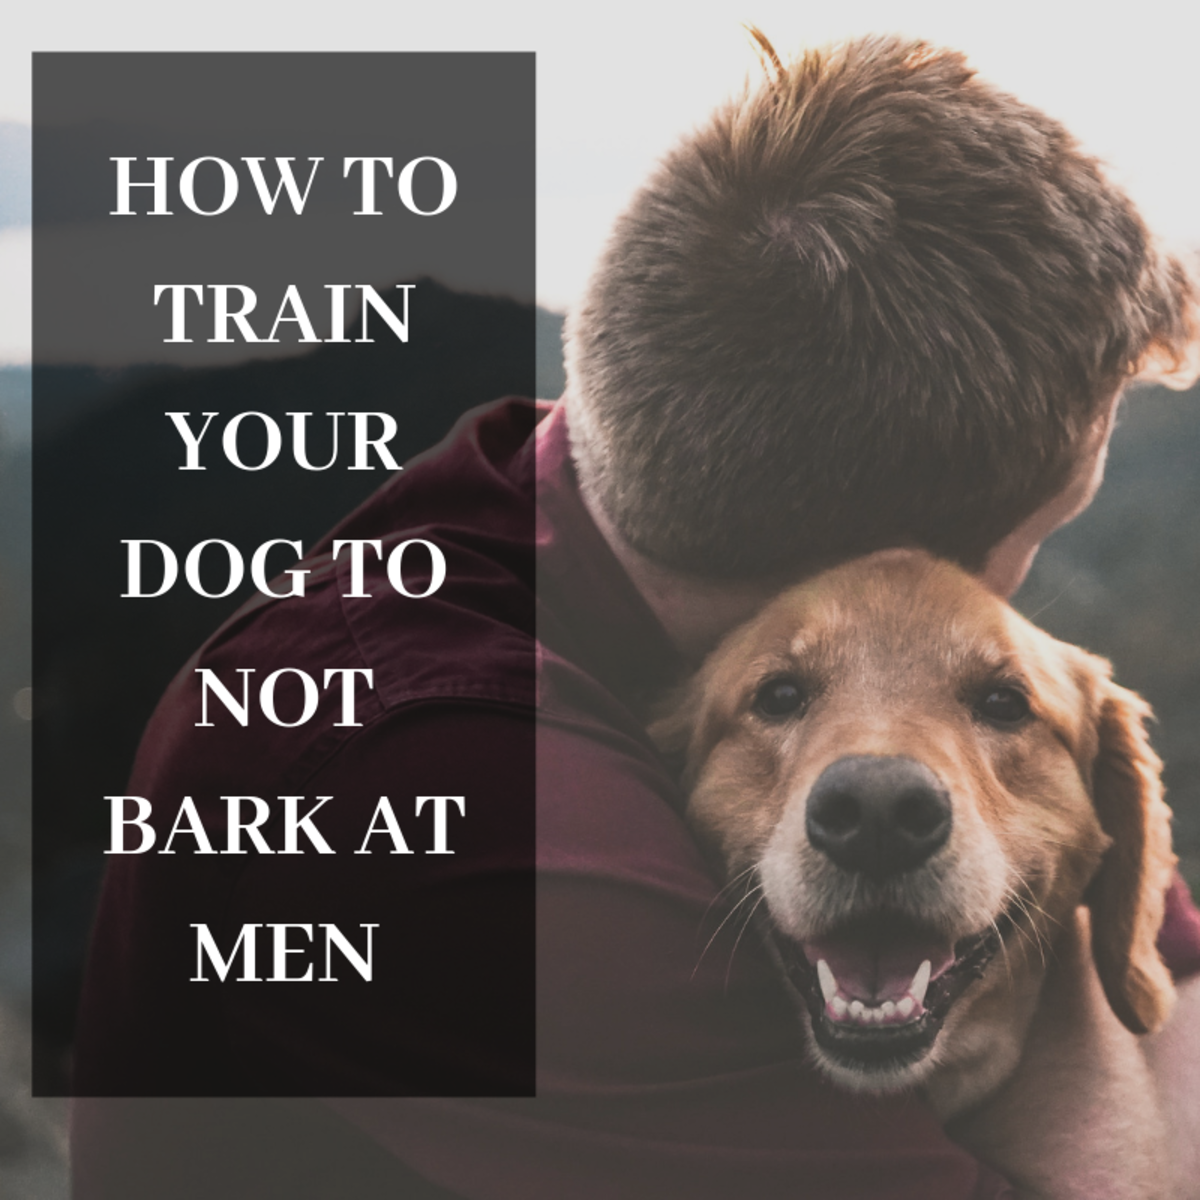 How To Stop Dog Aggression Towards Other Dog On Walks Aggressive dog